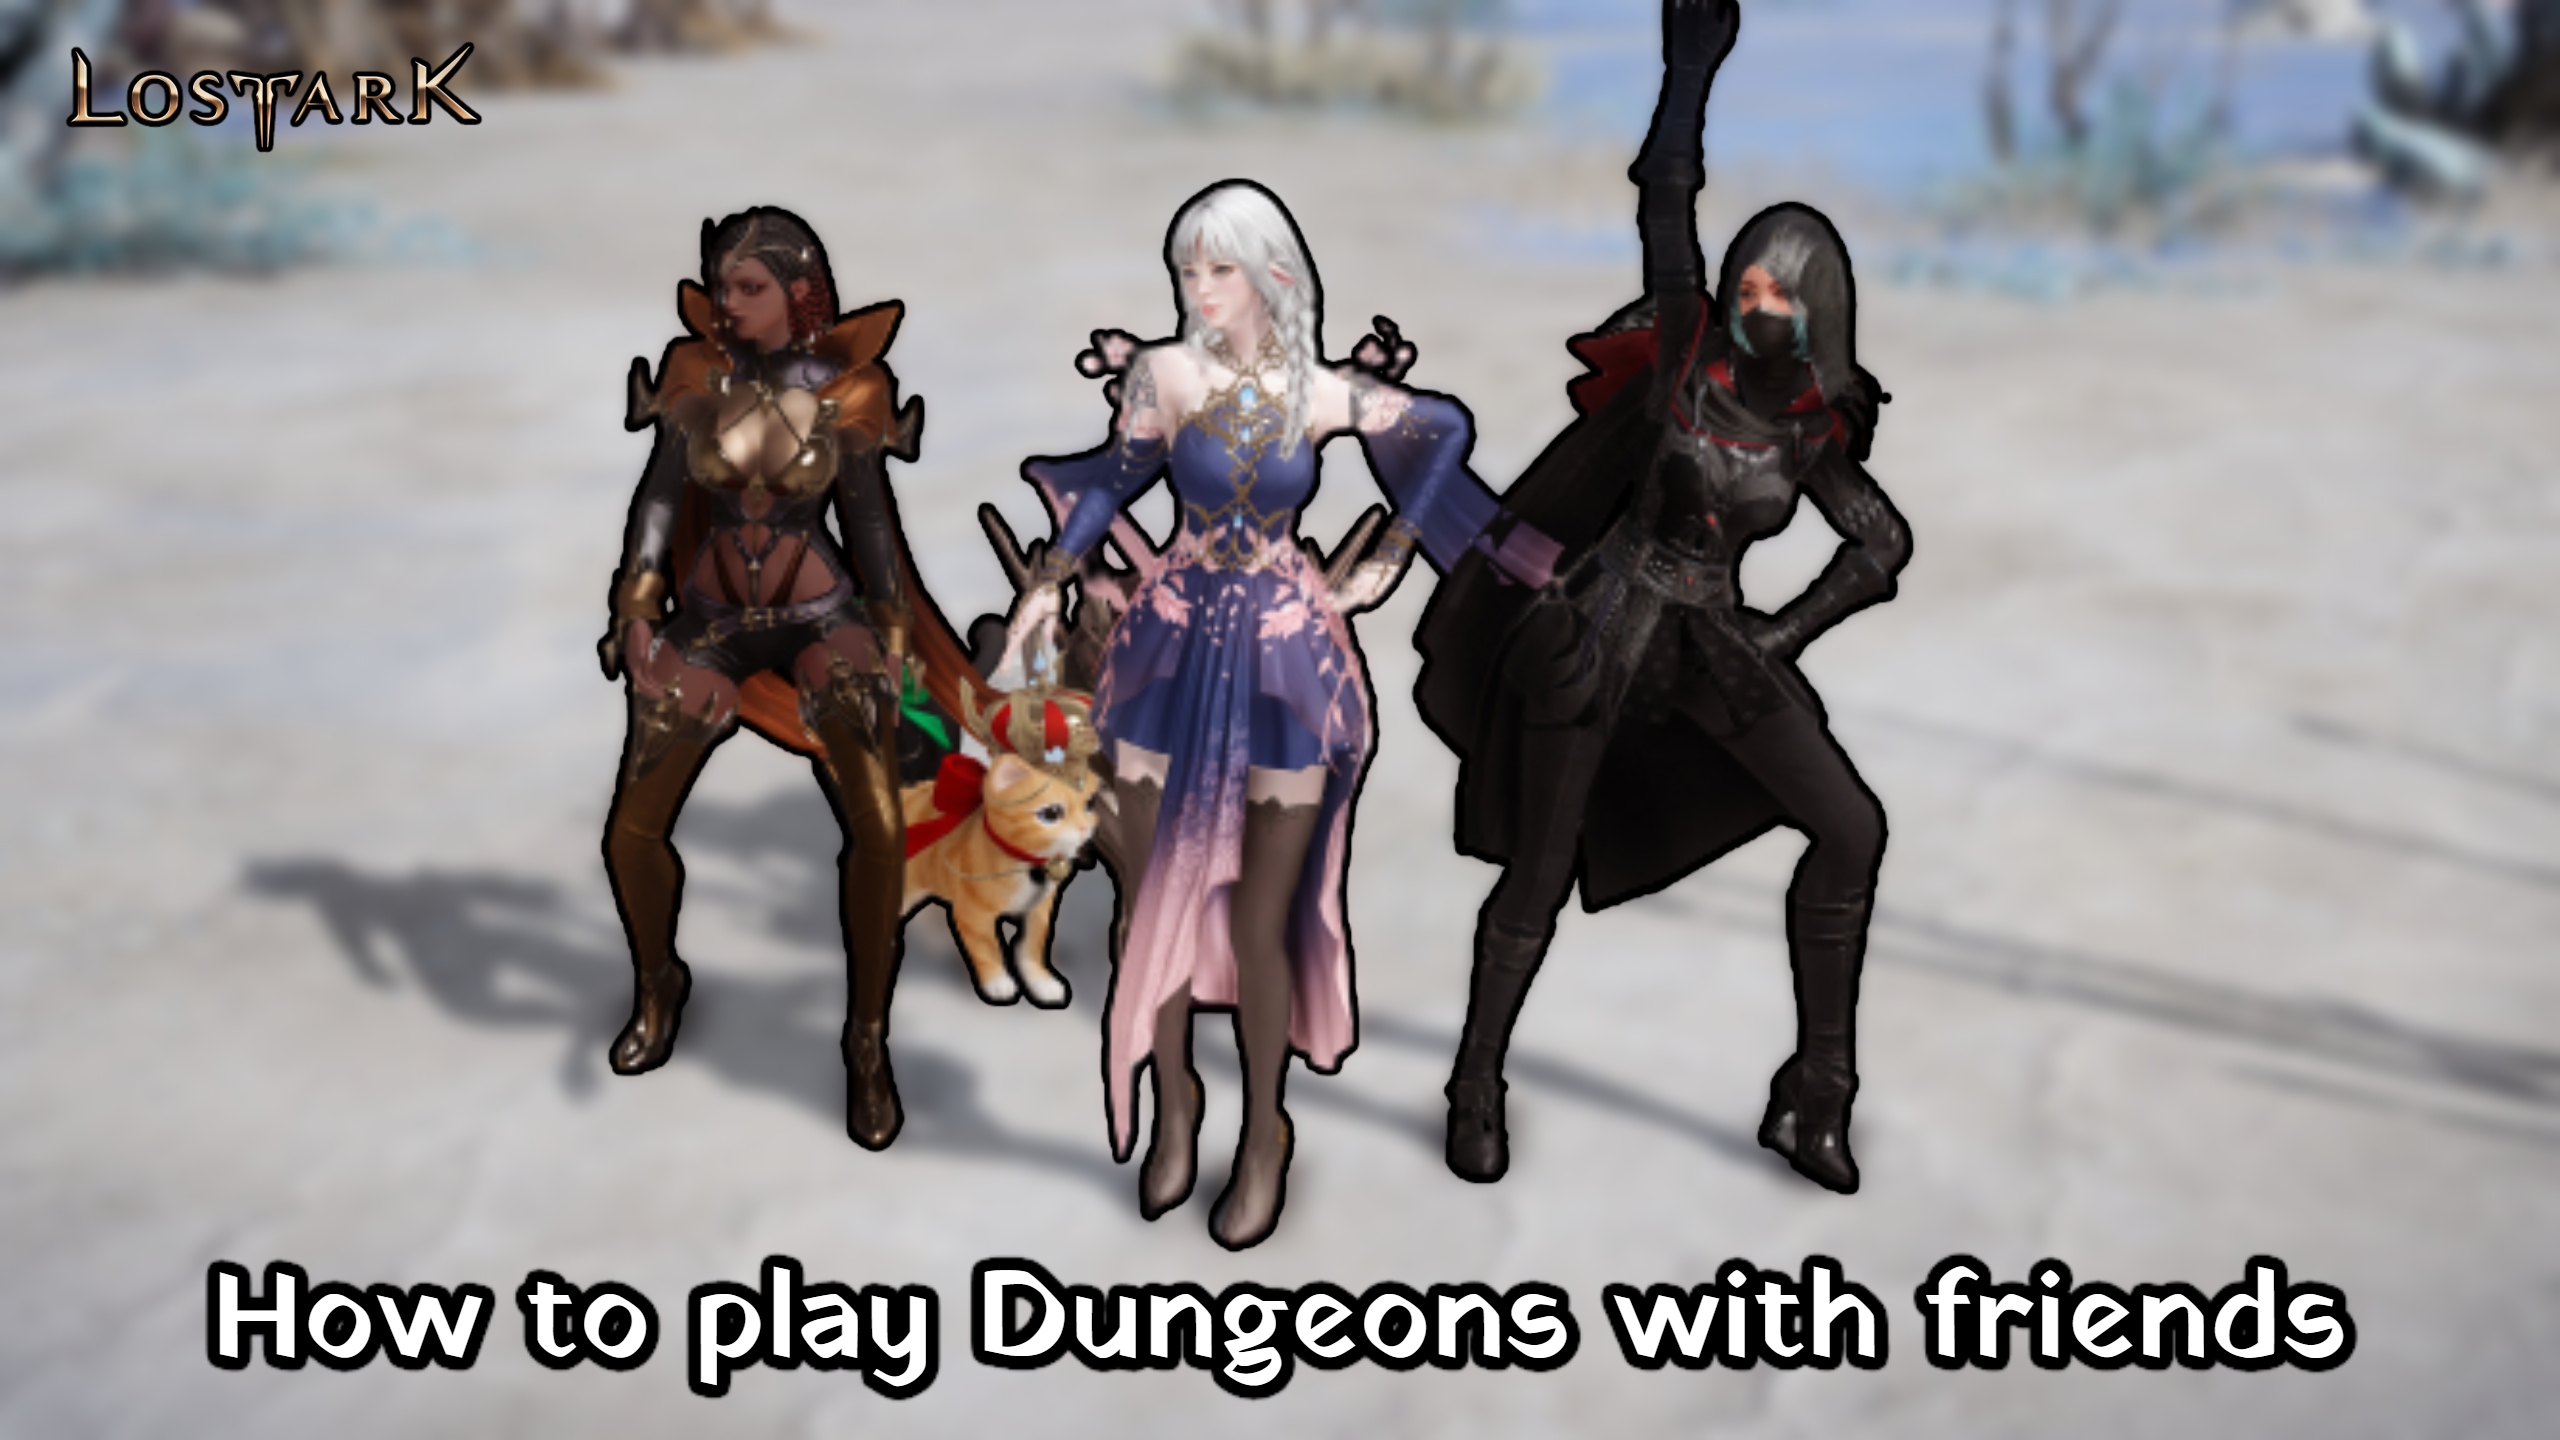 You are currently viewing Lost Ark: How to play Dungeons with friends